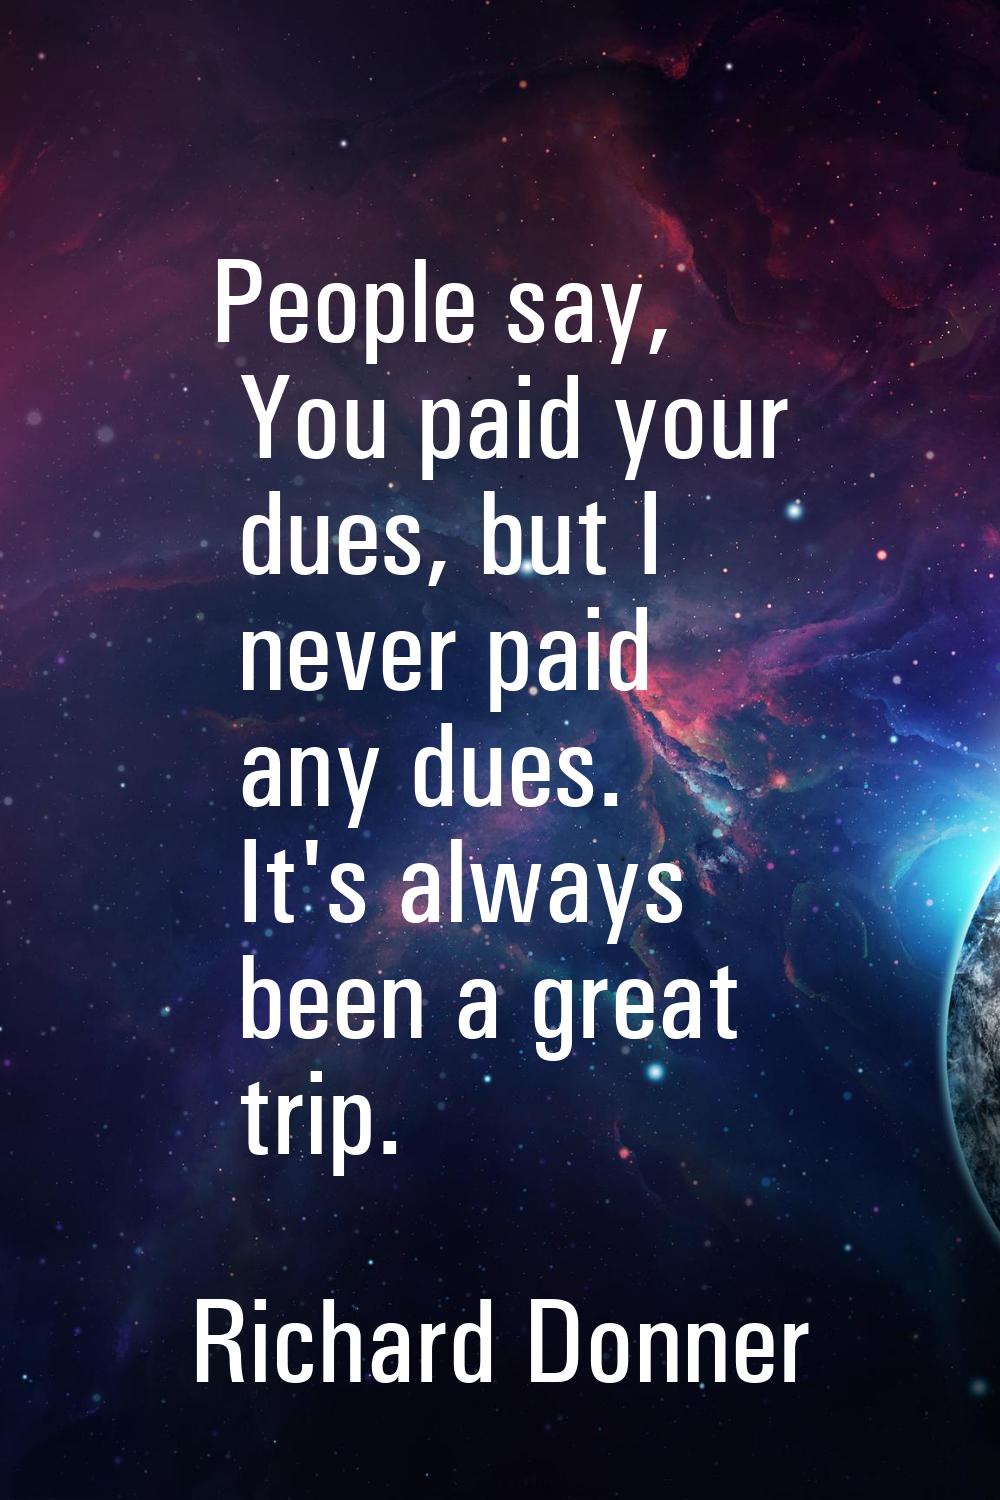 People say, You paid your dues, but I never paid any dues. It's always been a great trip.